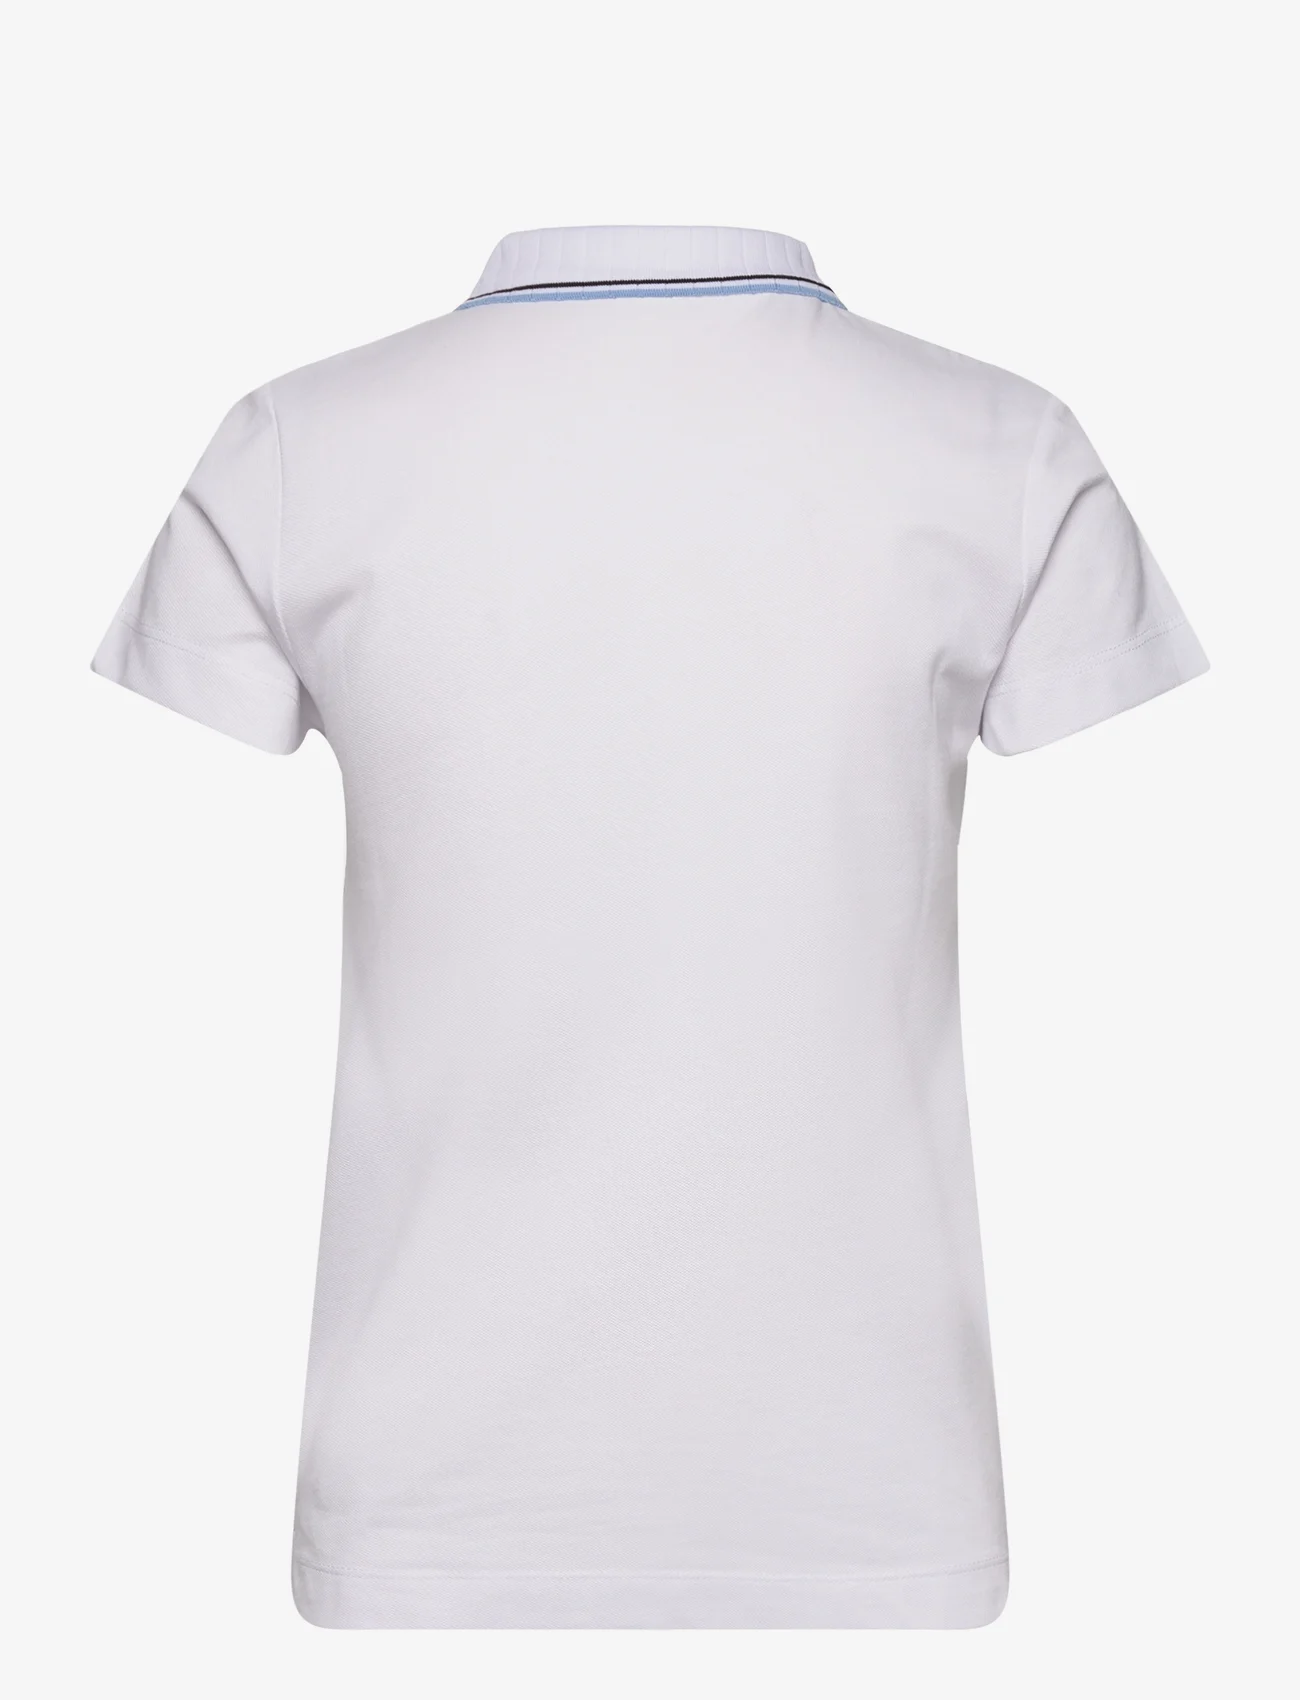 Daily Sports - CANDY CAPS POLO SHIRT - polo's - white - 1